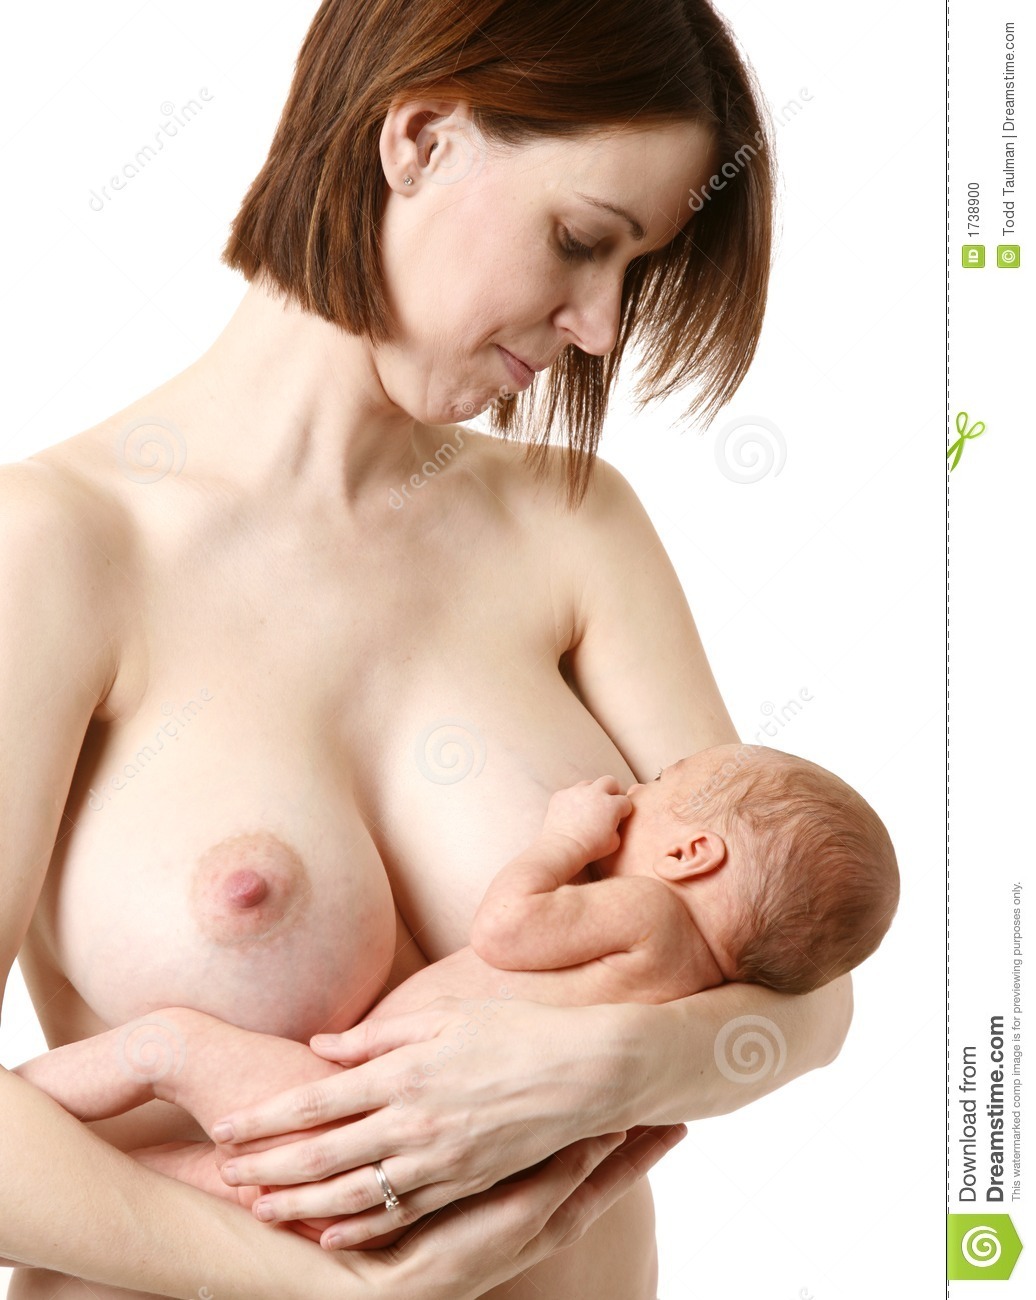 Breast feeding mom and lovemaking with son-in-law 5 on rus.sexviptube.com